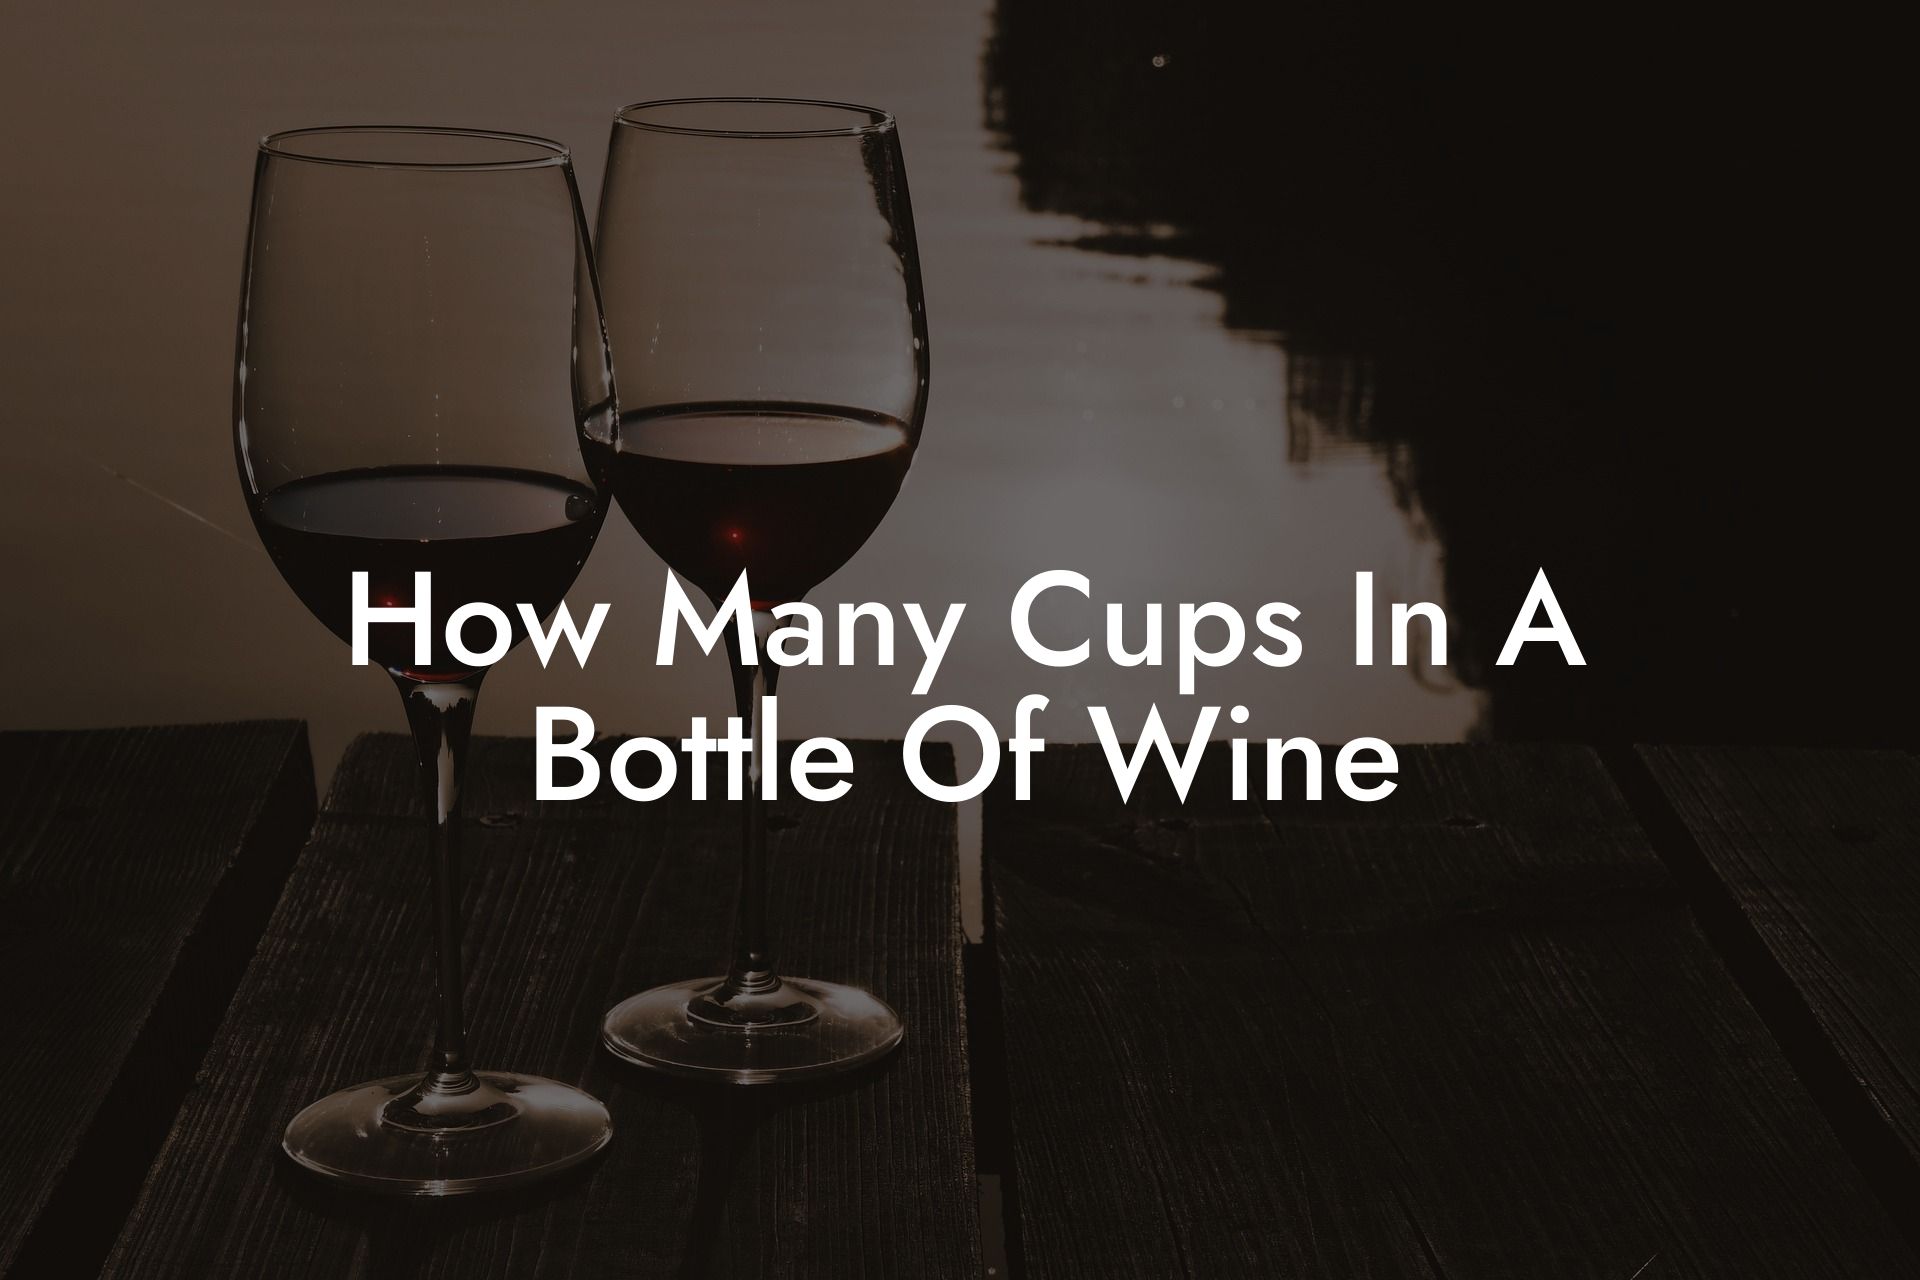 How Many Cups In A Bottle Of Wine